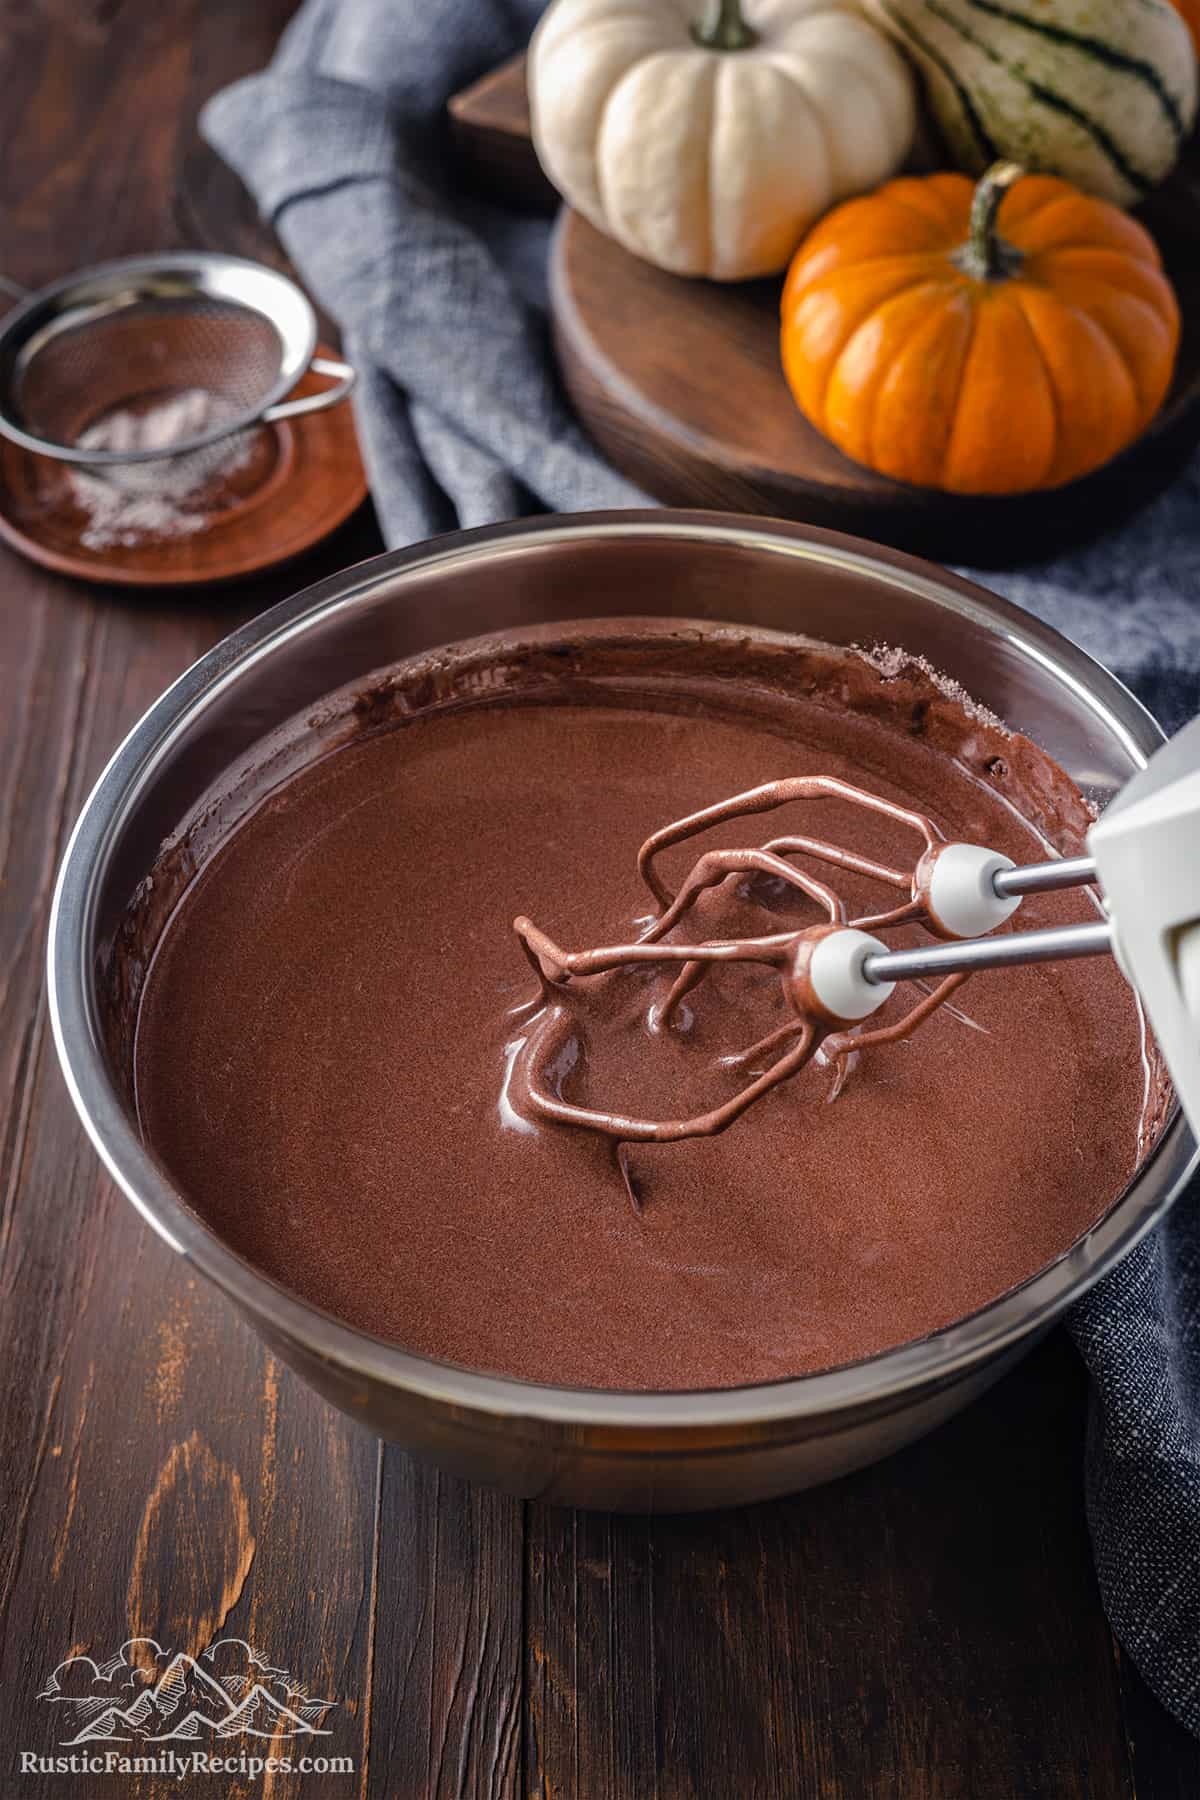 Mixing a bowl of chocolate cake batter.